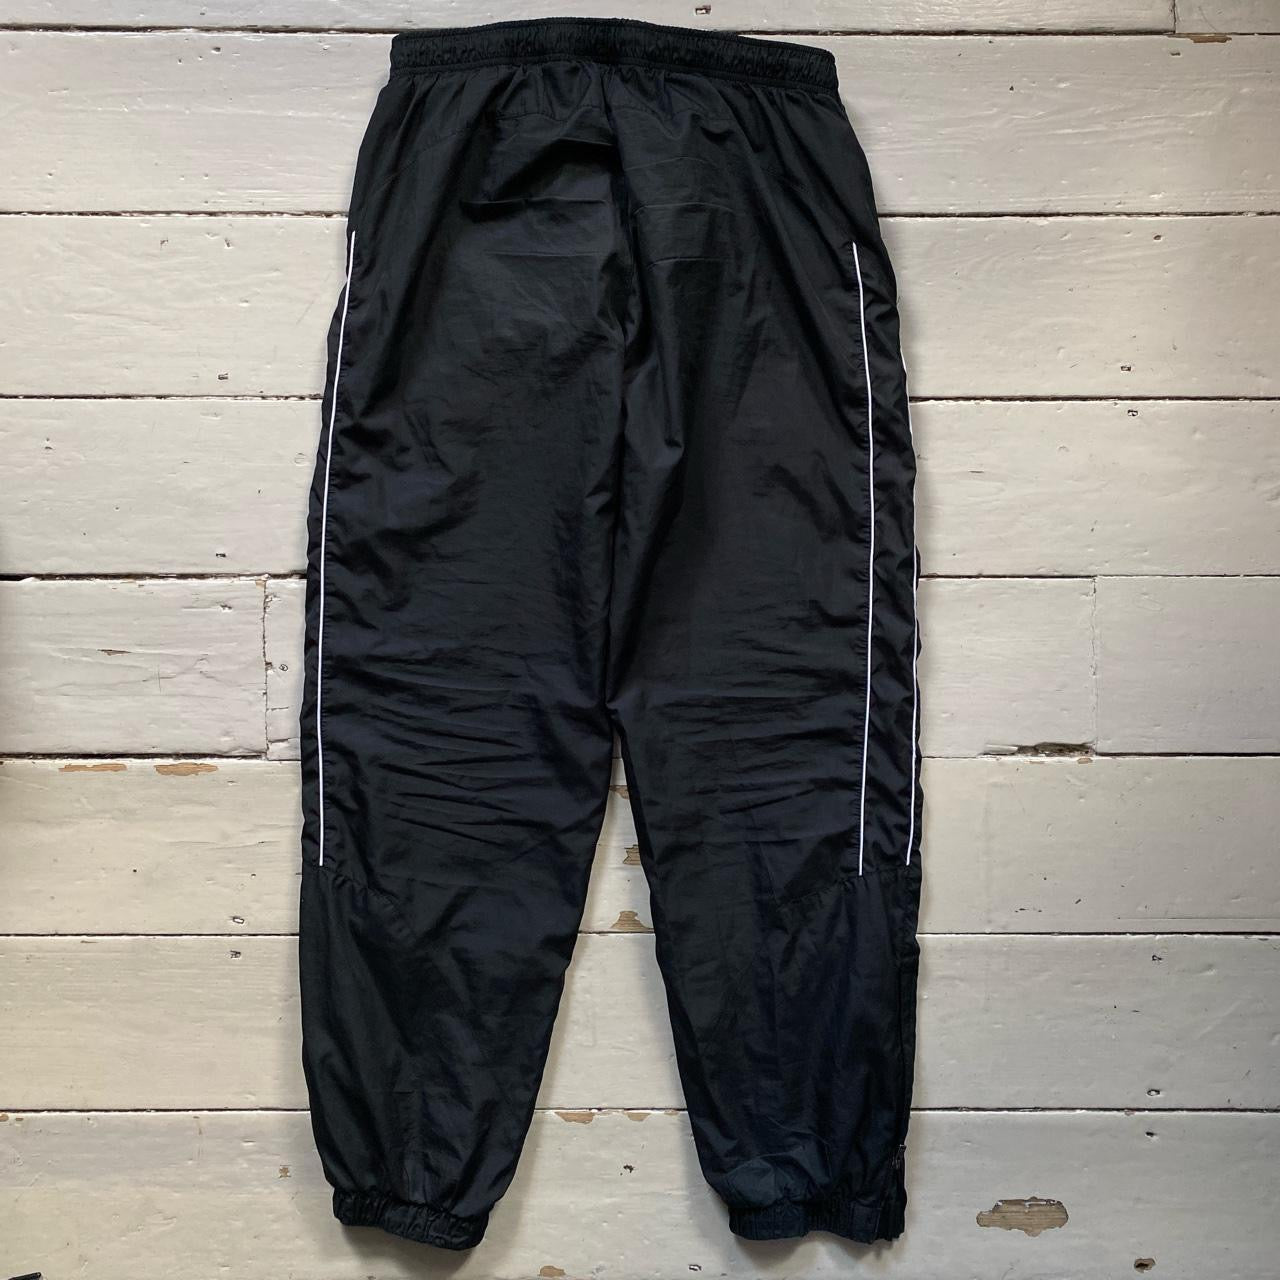 Nike Athletic Department Shell Bottoms (Large)